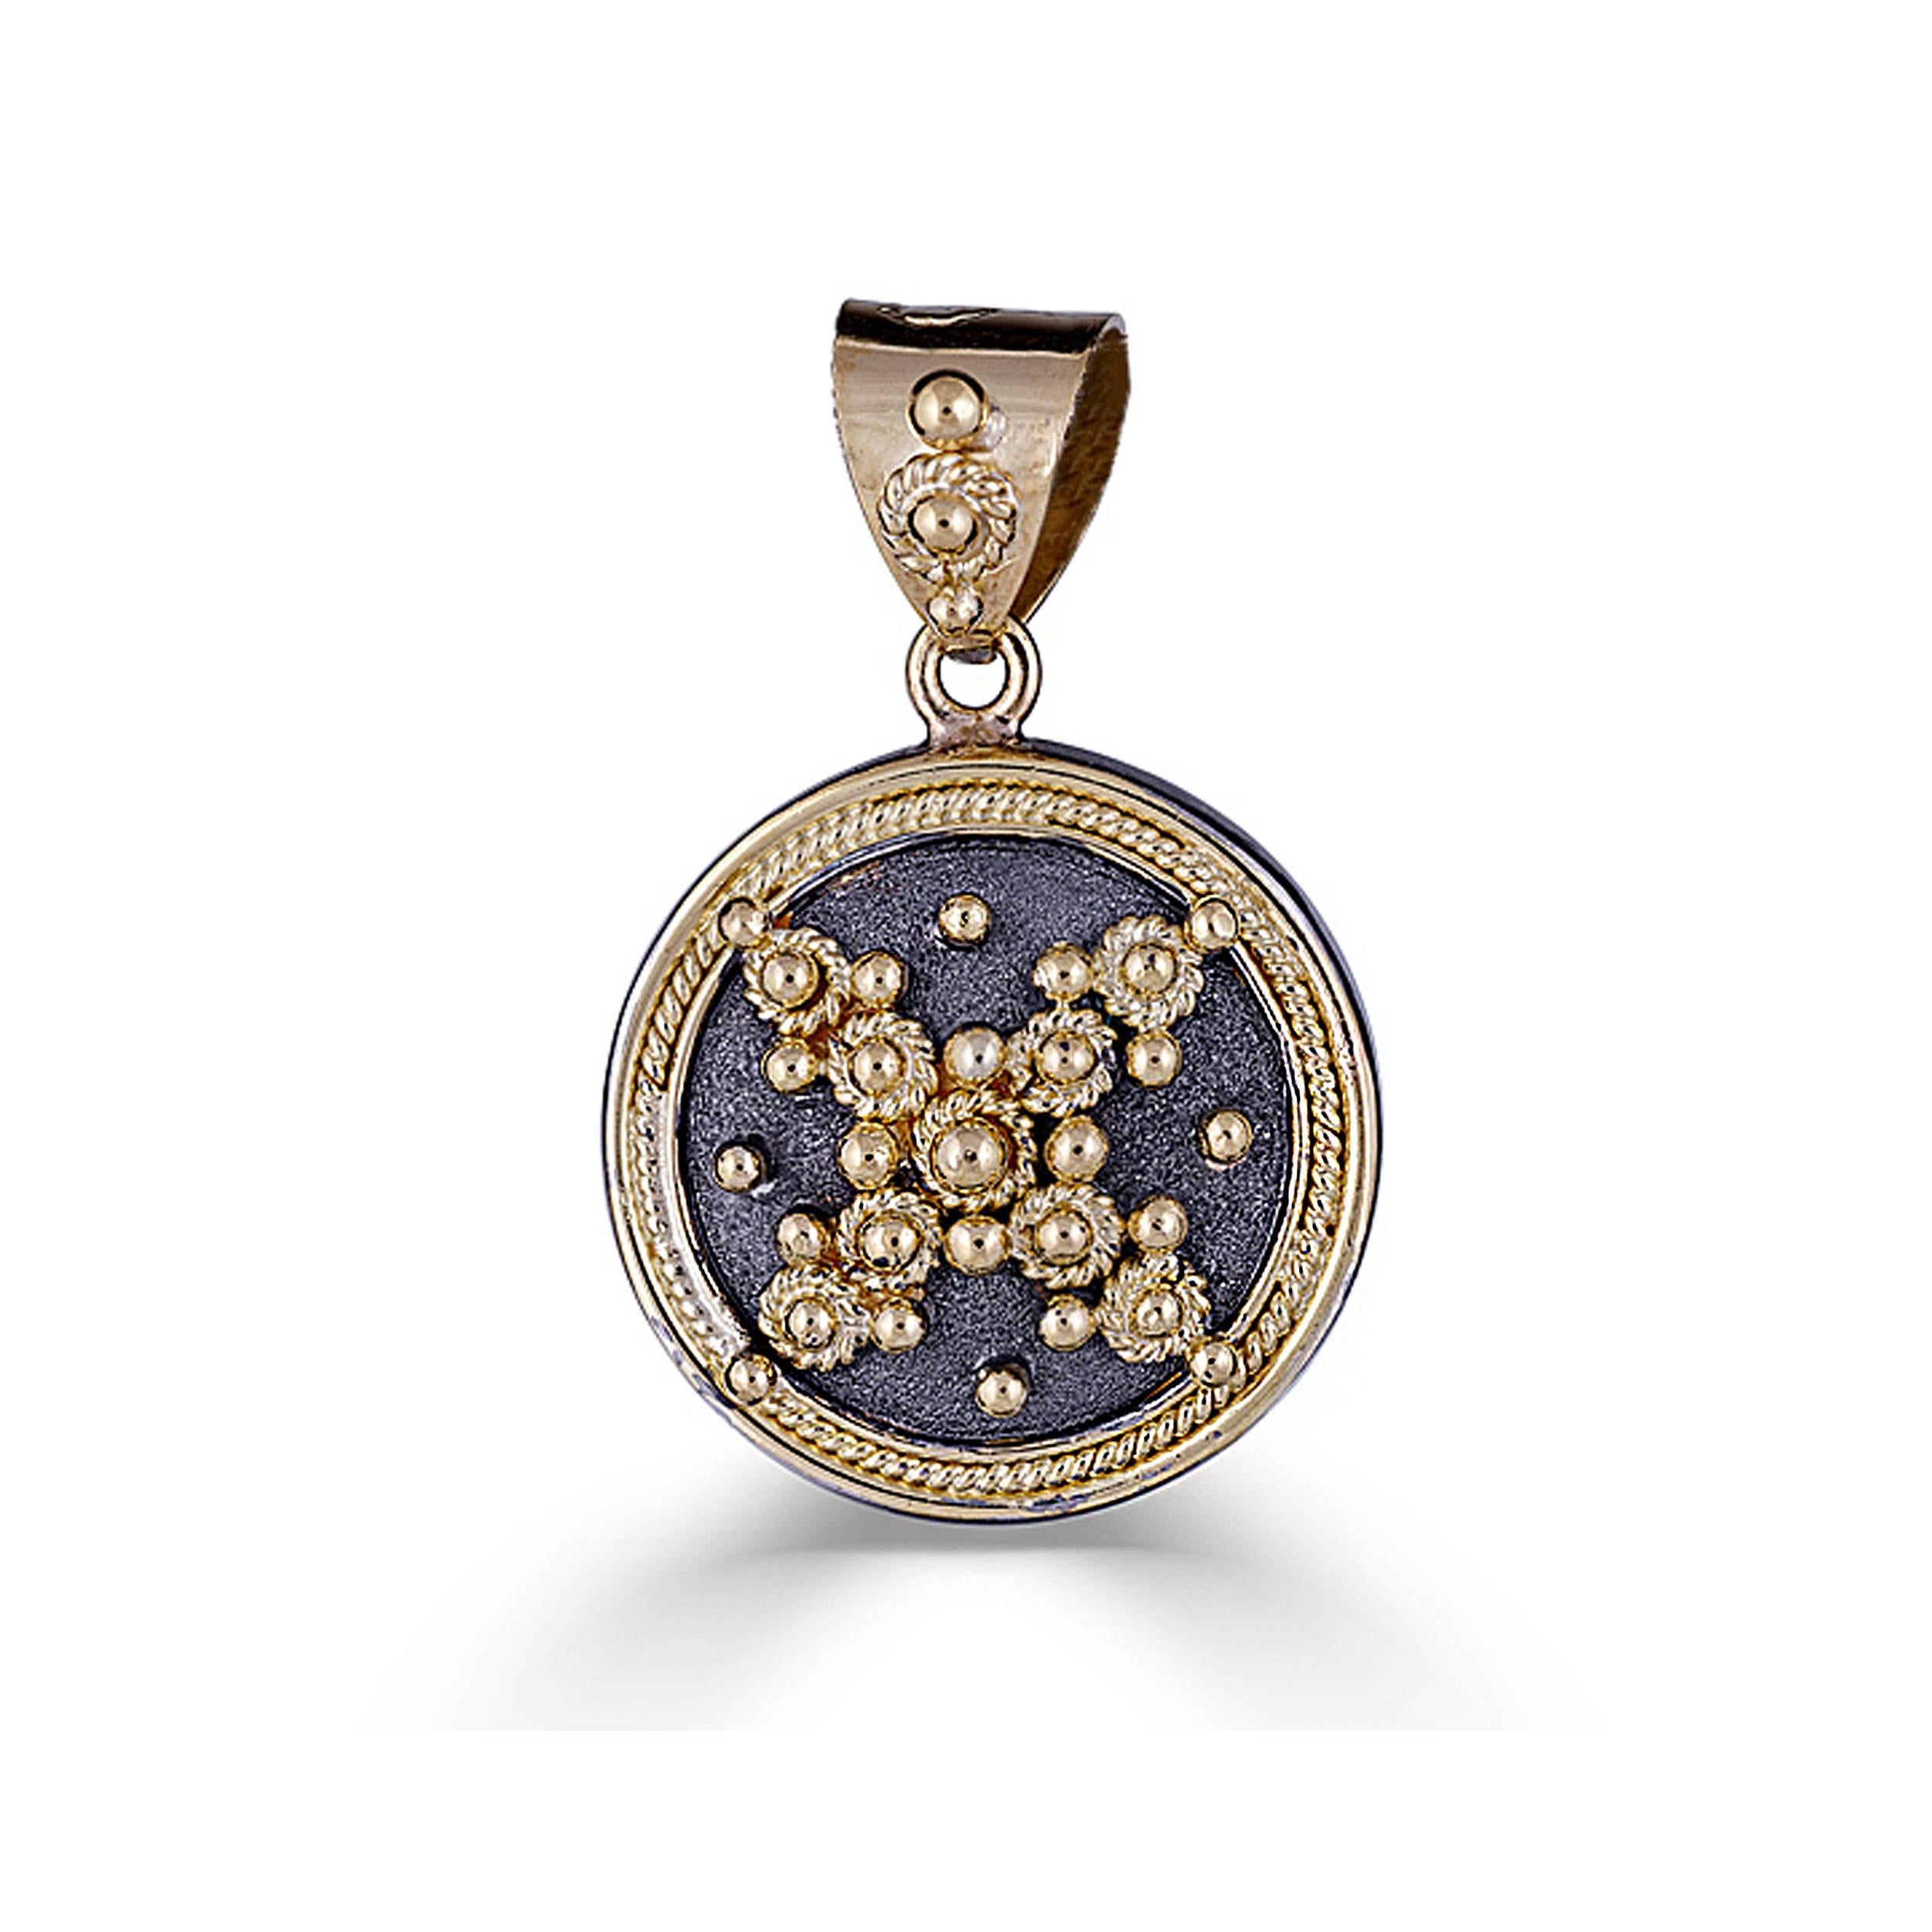 S.Georgios unique designer pendant is all handmade from solid 18 Karat yellow Gold. This pendant is microscopically decorated - it has granulation work all the way around with gold beads and wires shaped as the last letter of the Greek Alphabet -